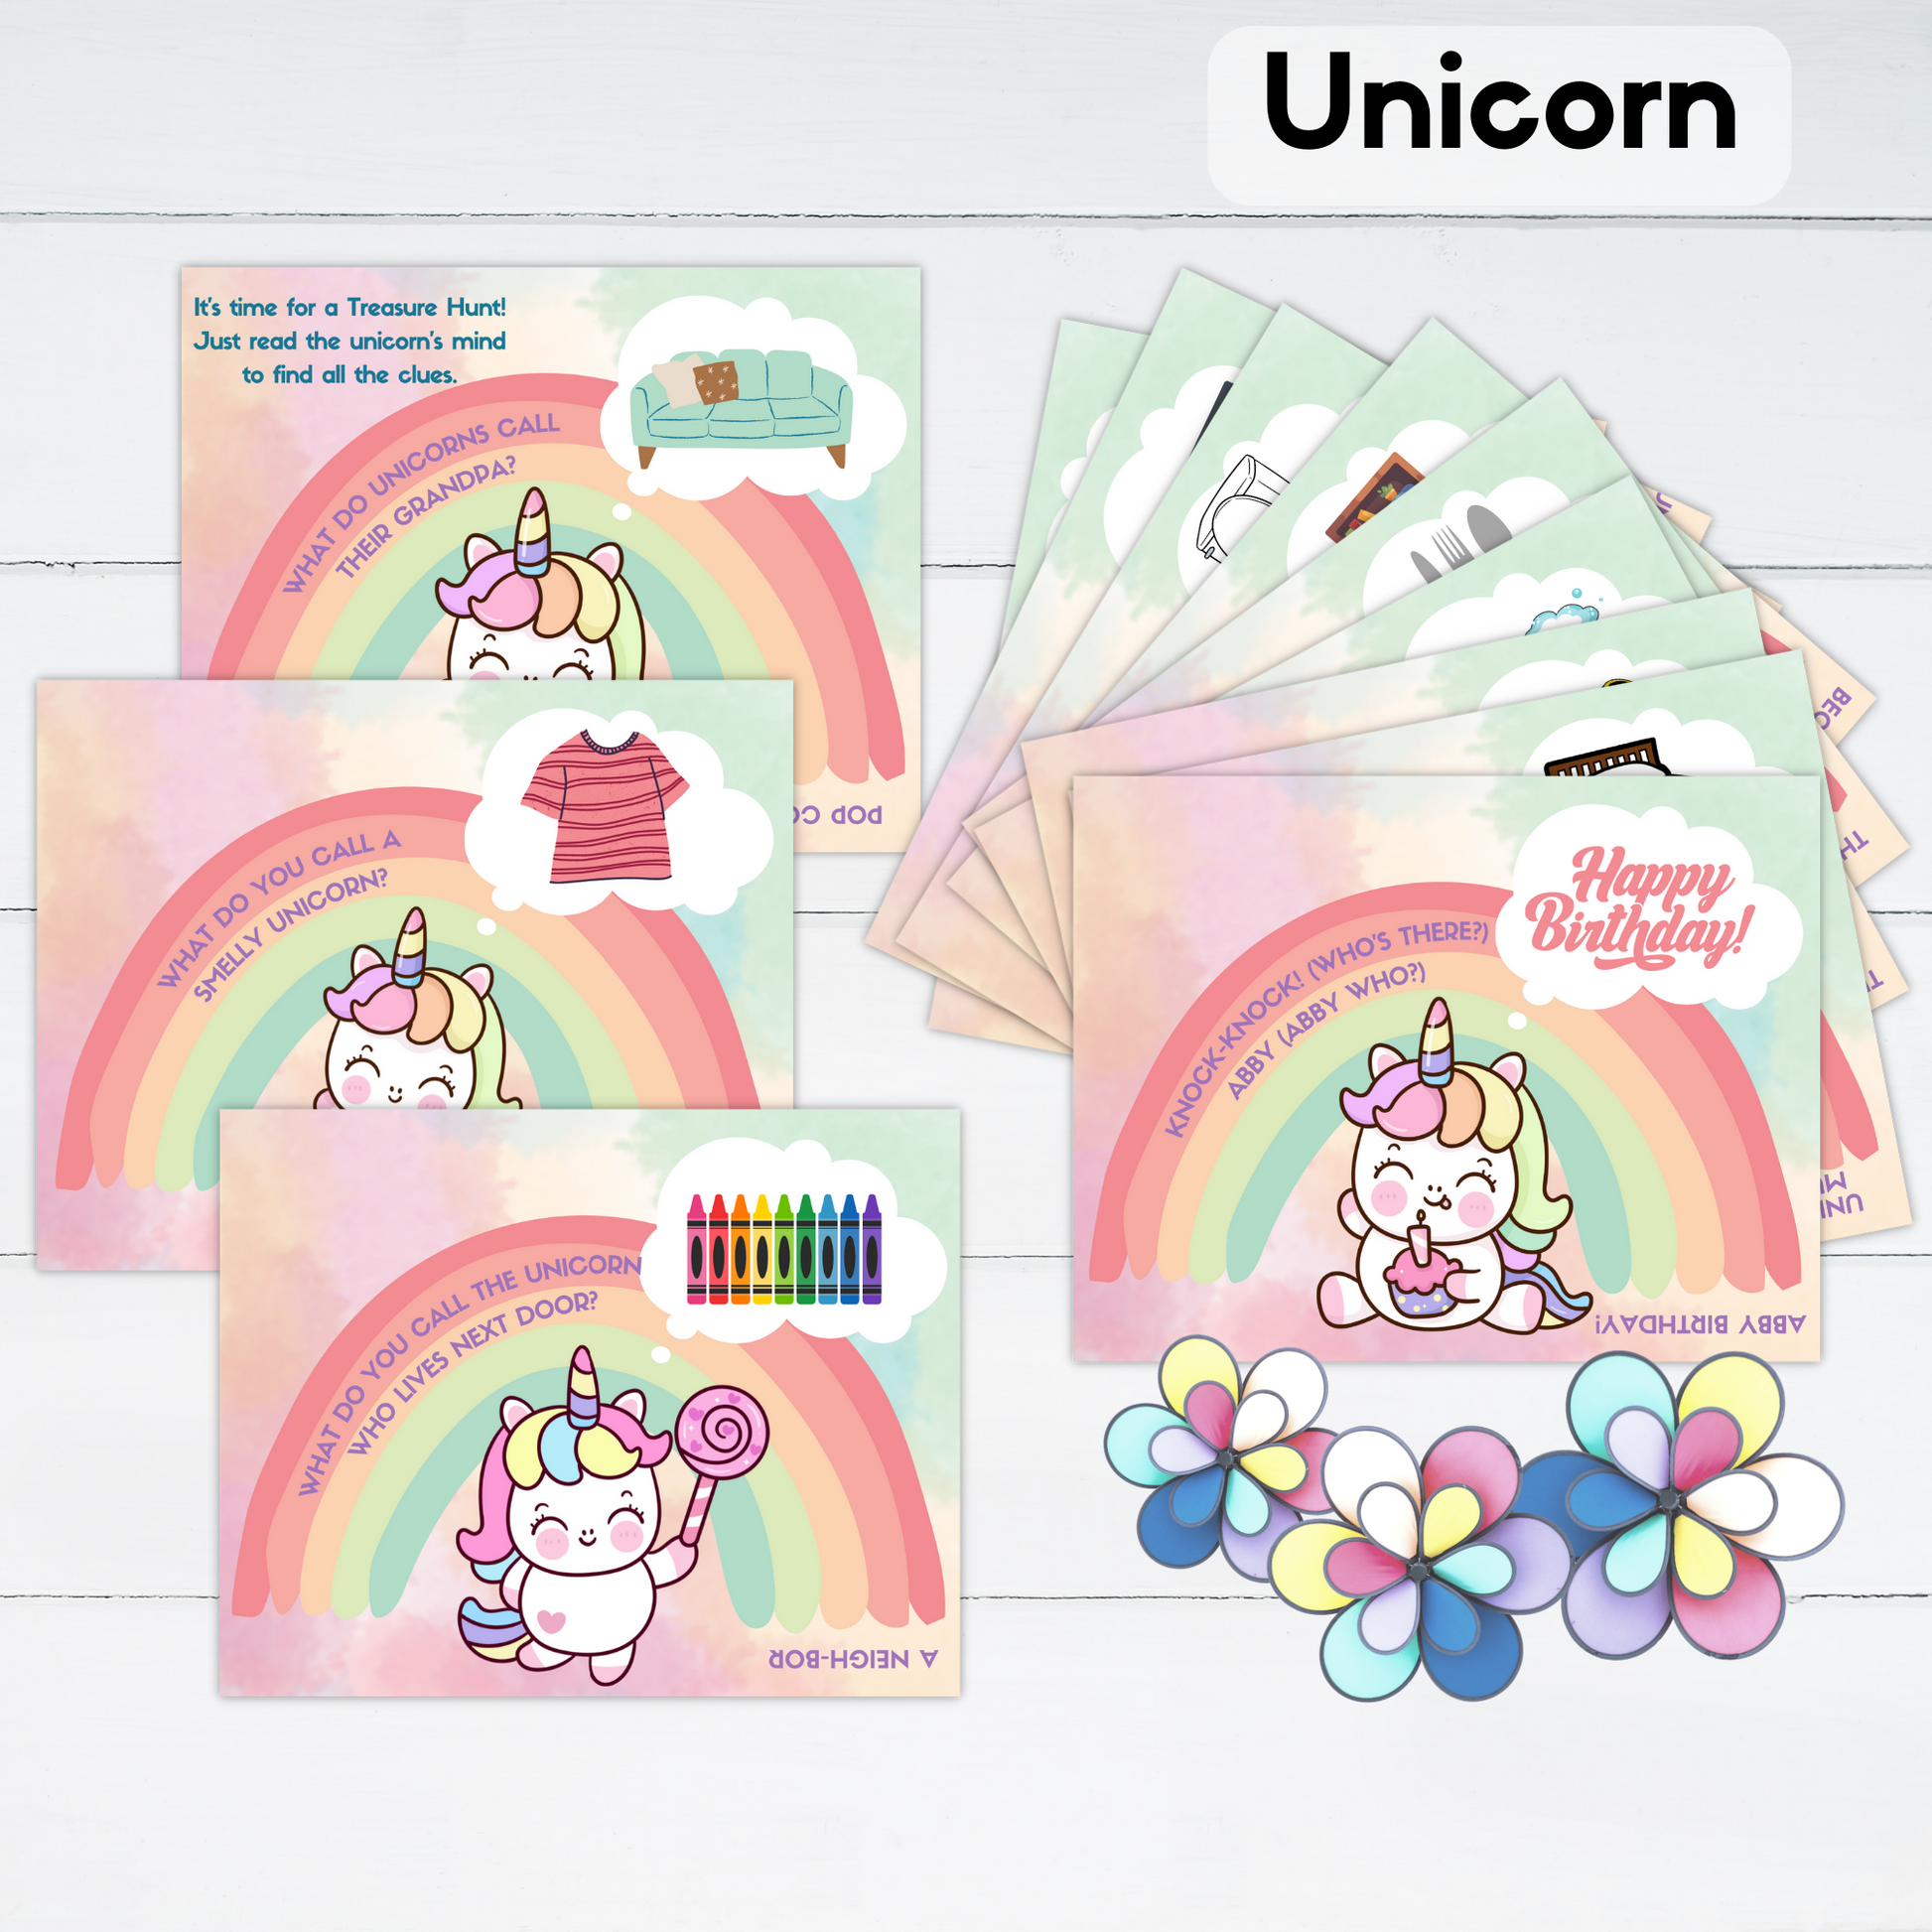 The cards for a unicorn themed treasure hunt are displayed with some flowers.